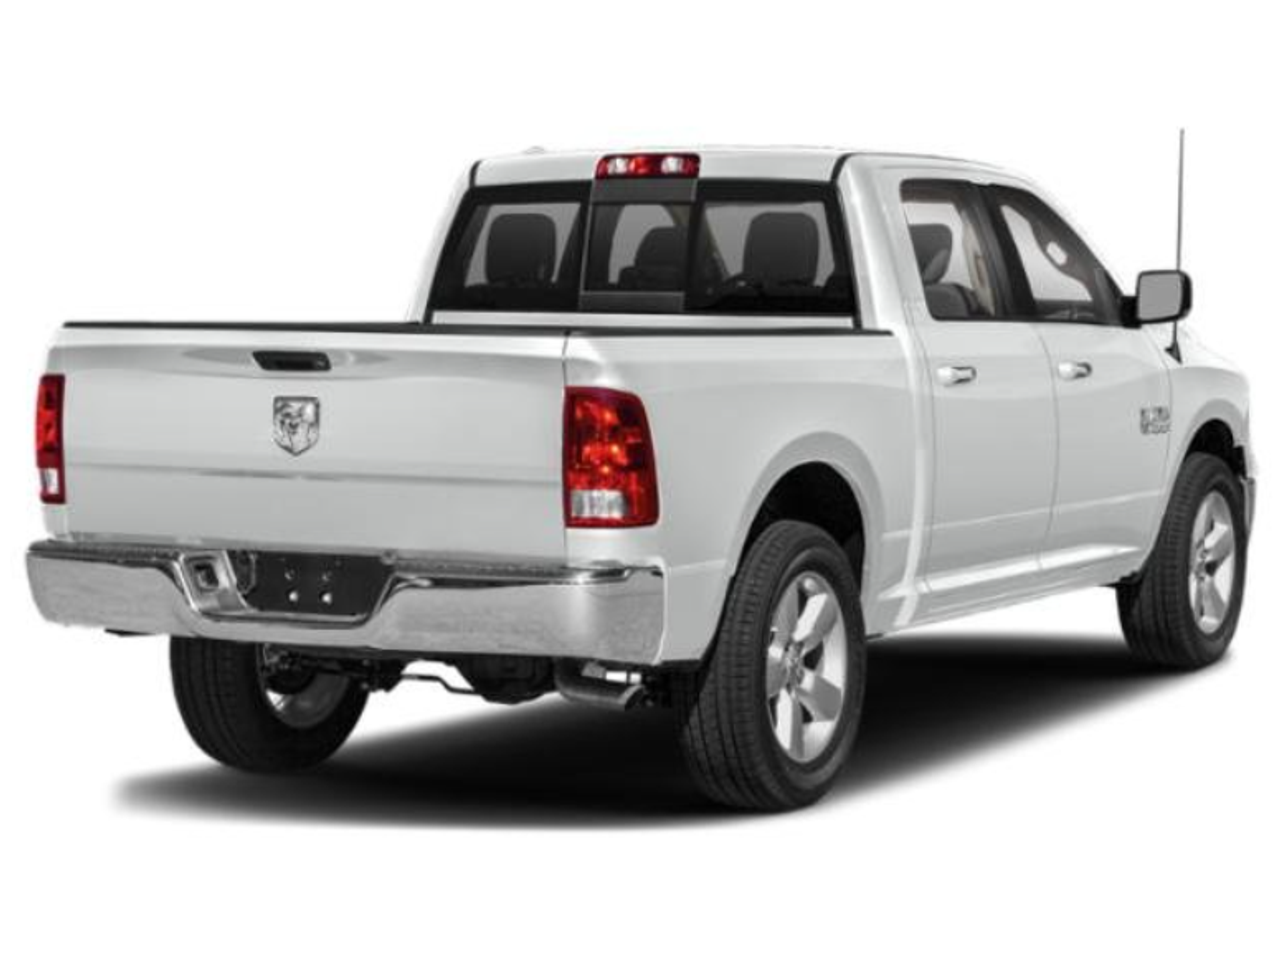 New 2023 White Dodge Ram 1500 SSV 4x4 Truck, ready to be built as an Admin Package (Emergency Lighting, Siren, Controller,  Console, etc.), + Delivery, 23RAMA3